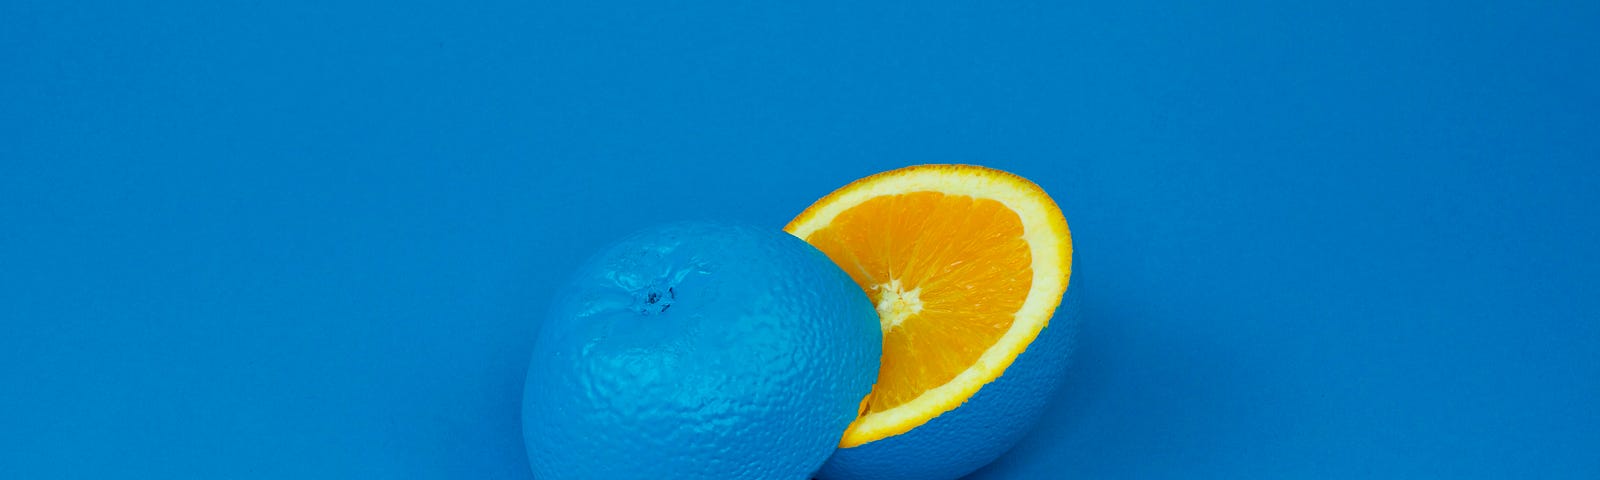 An orange, sliced in half, painted blue on a blue background